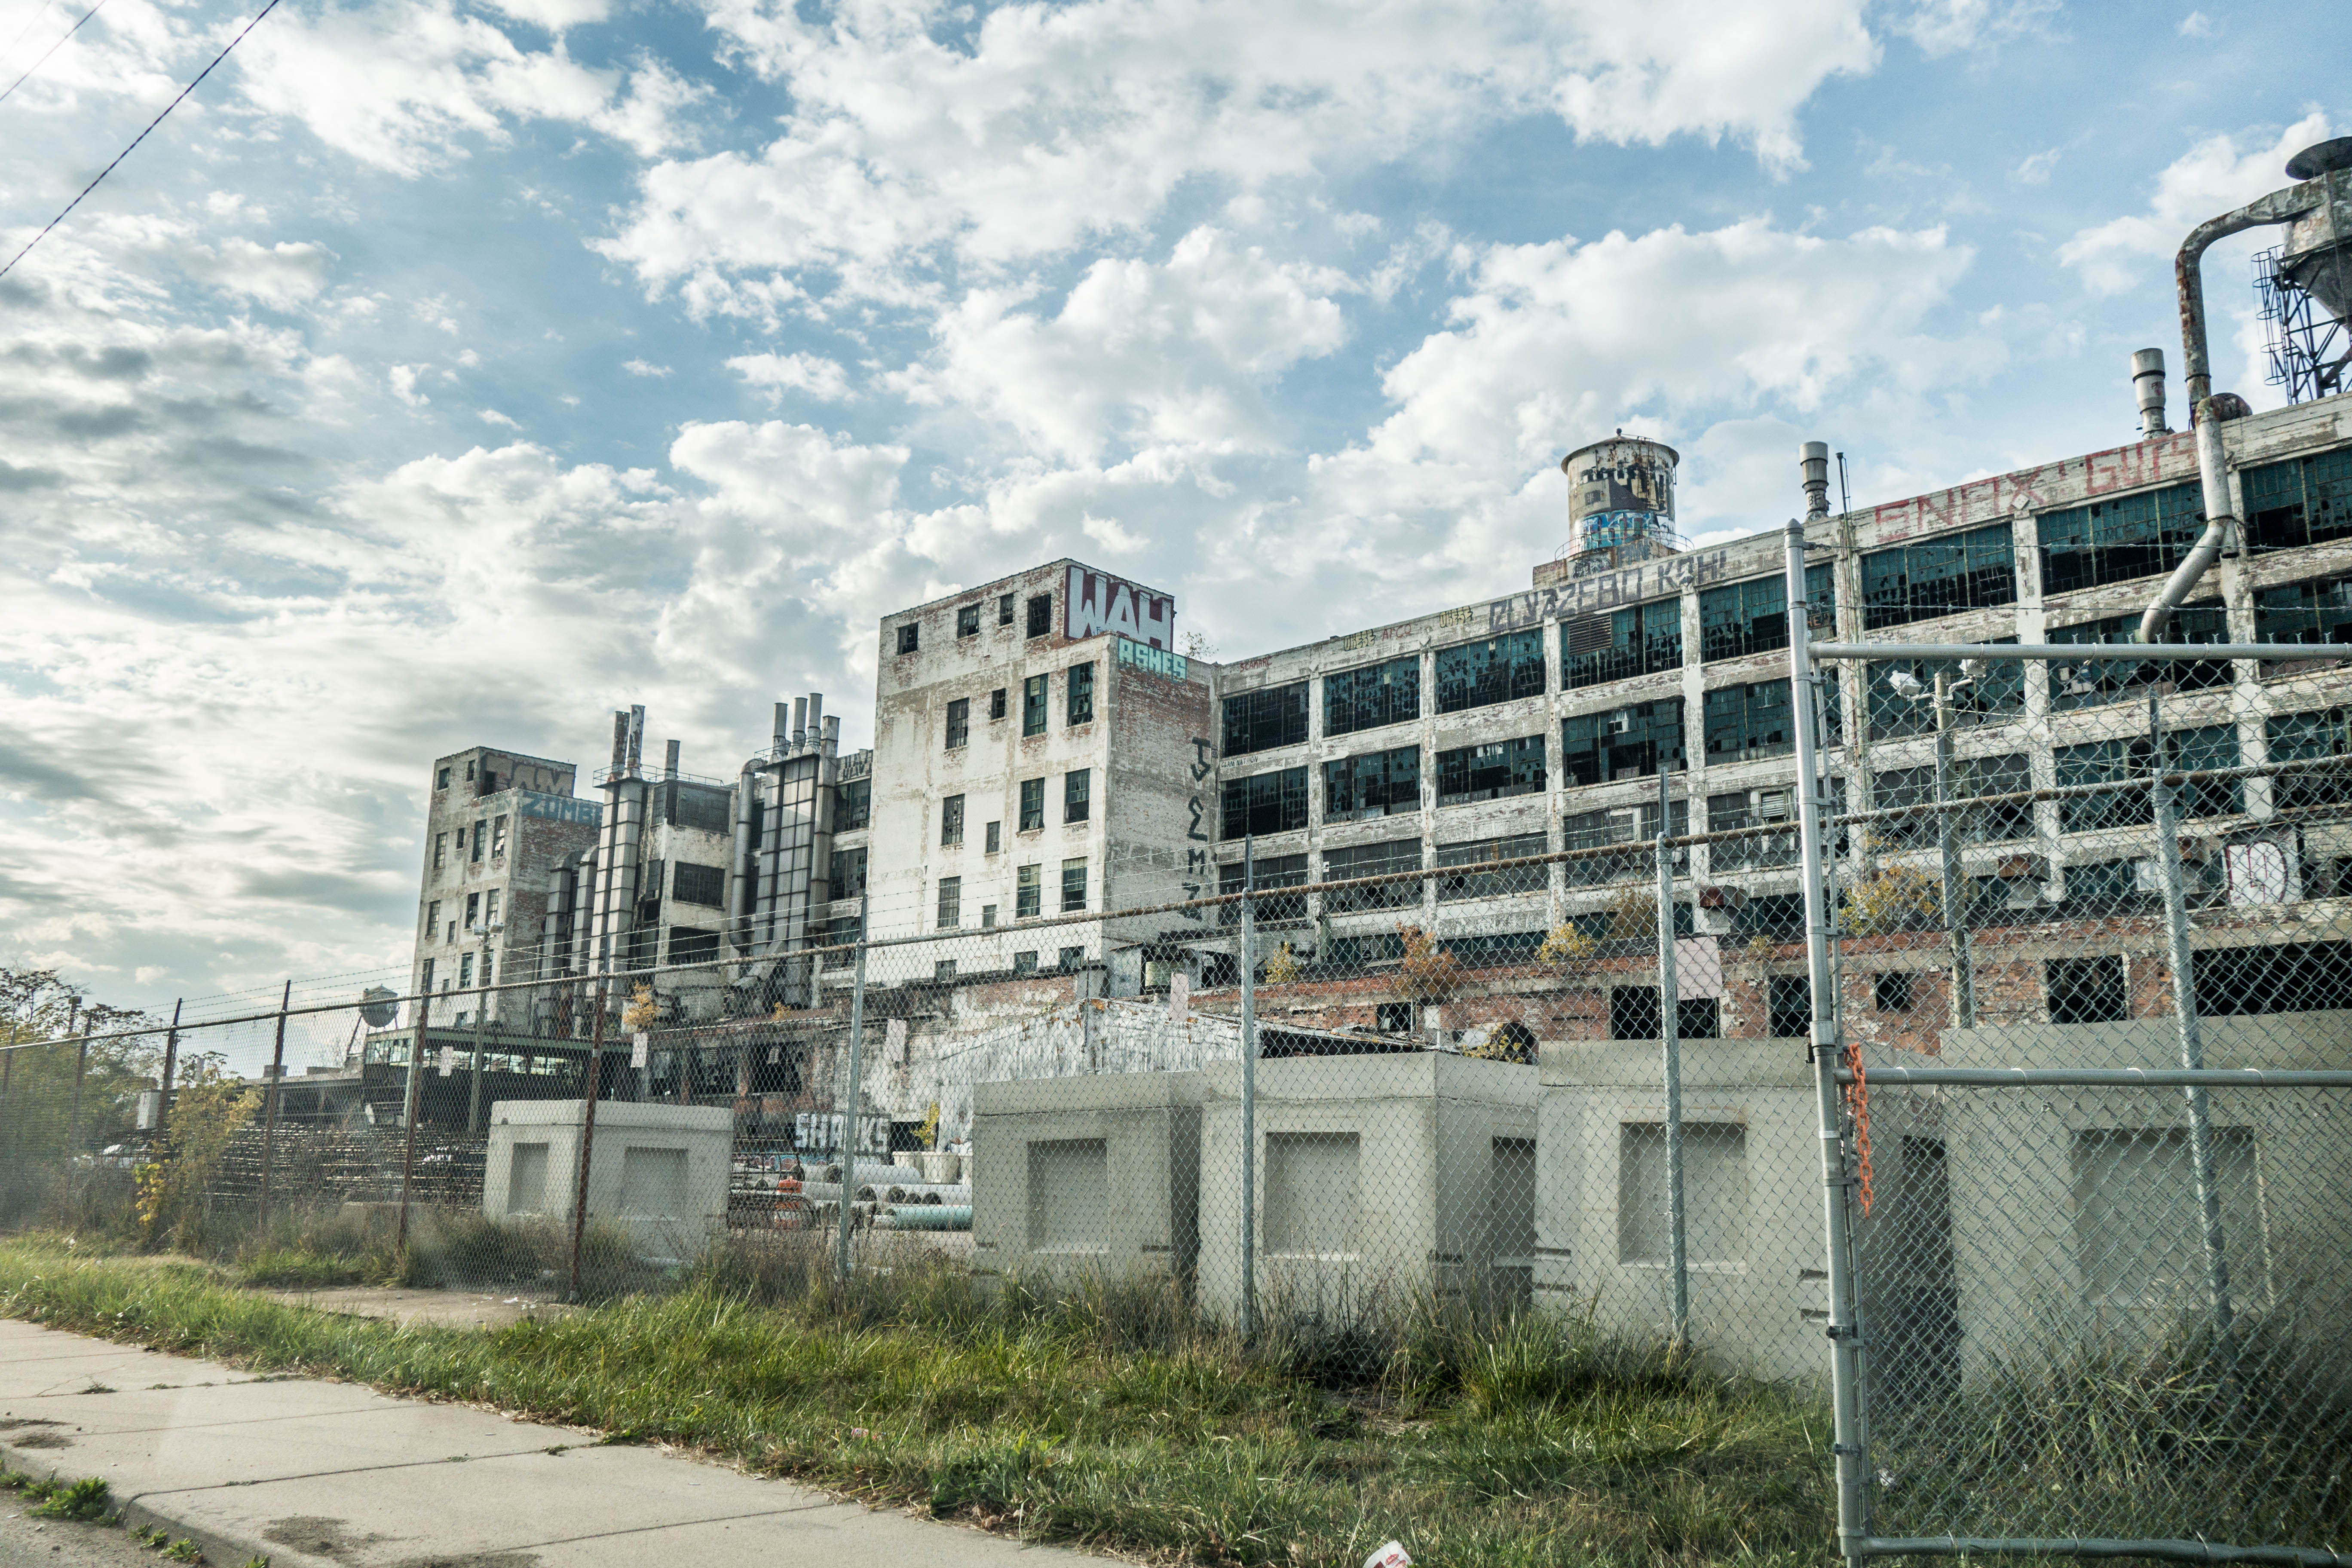 Abandoned Building in Detroit, MI - Free Stock Photo - Easy Download